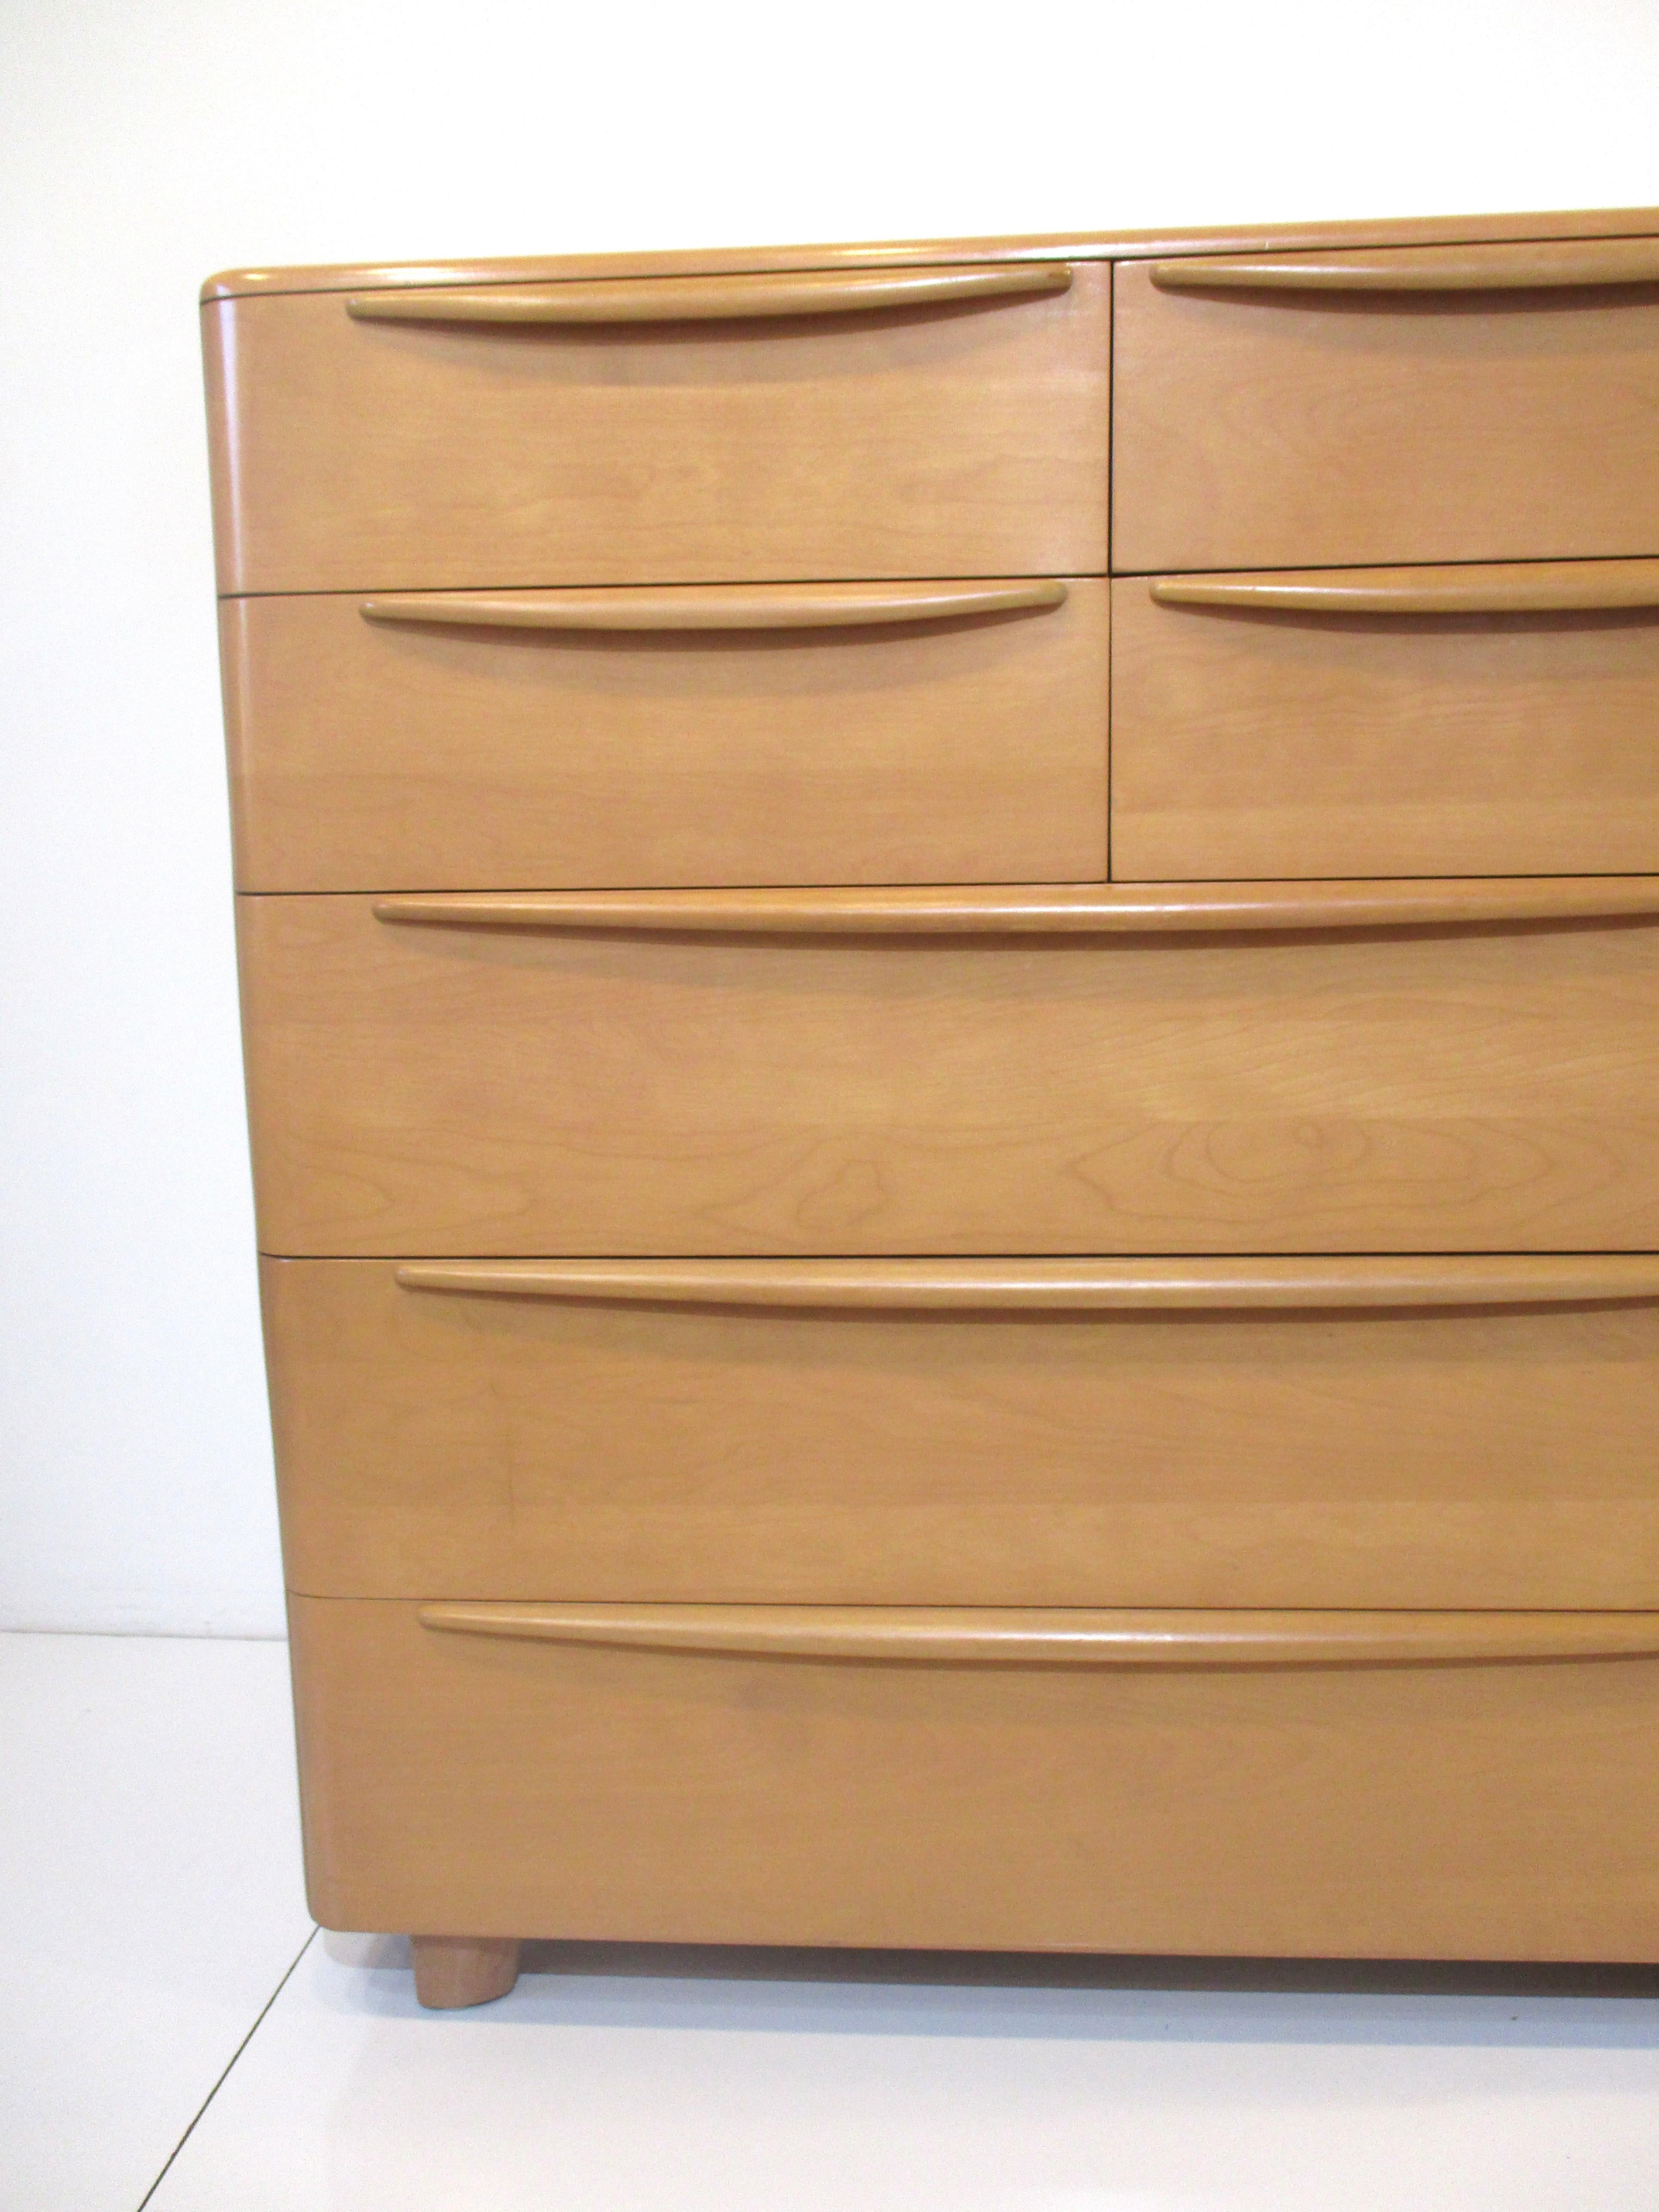 A very well crafted solid maple wood double dresser chest with four smaller drawers to the top and three larger ones to the bottom. Streamline pulls run the length of each drawer top and rounded corners give the piece that nice simple smooth look